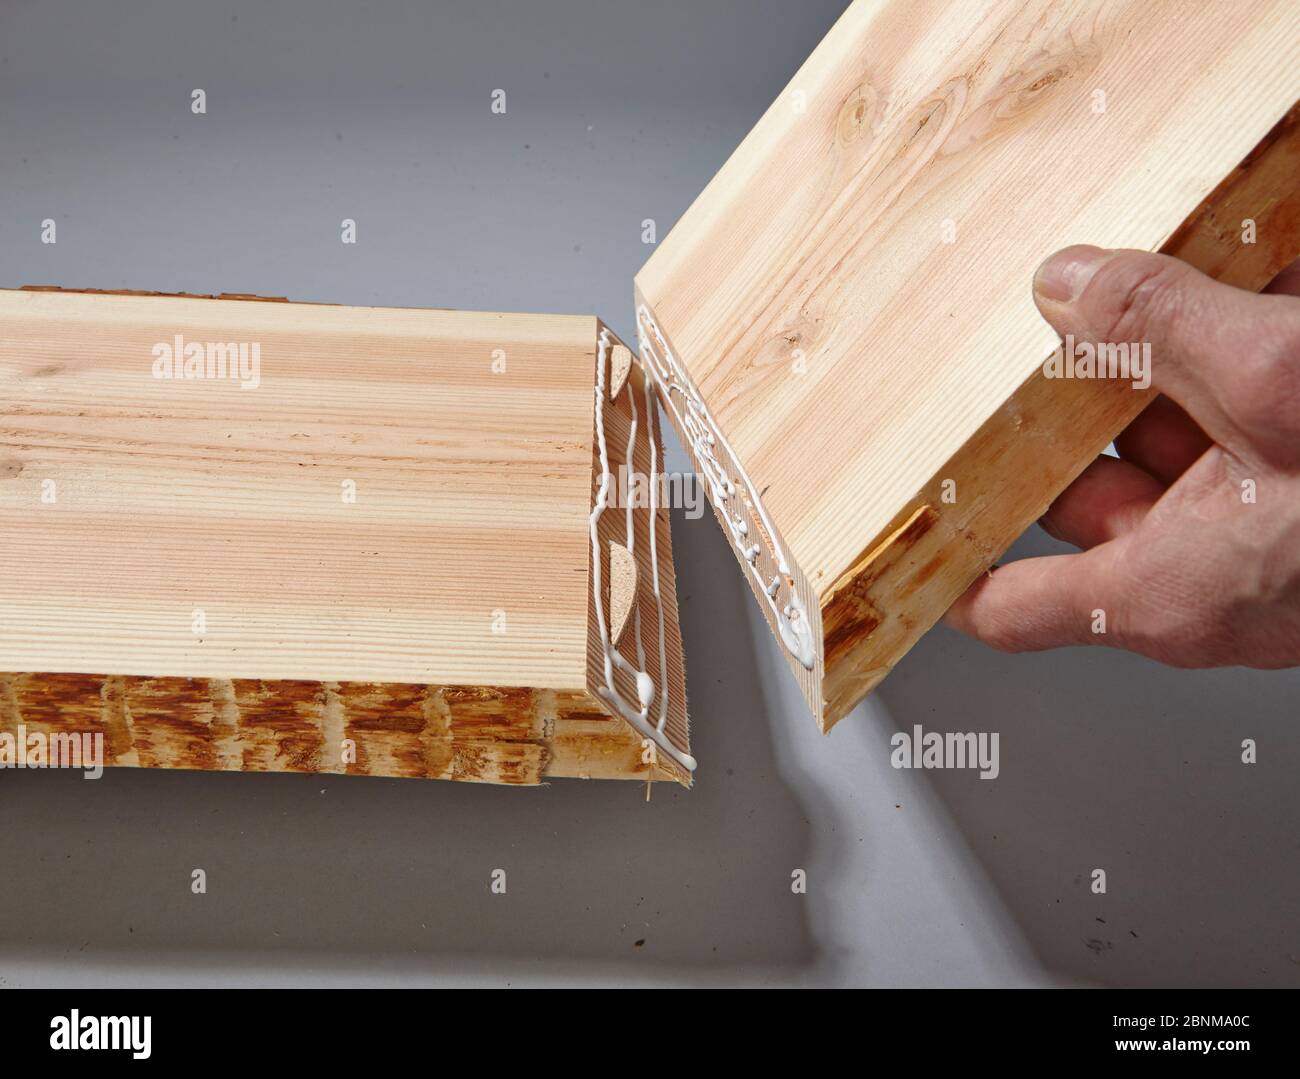 Construction of a shelf made of wood, do-it-yourself production, step-by-step, step 7 merging the two boards to be glued, using flat dowels to stabilize the gluing Stock Photo